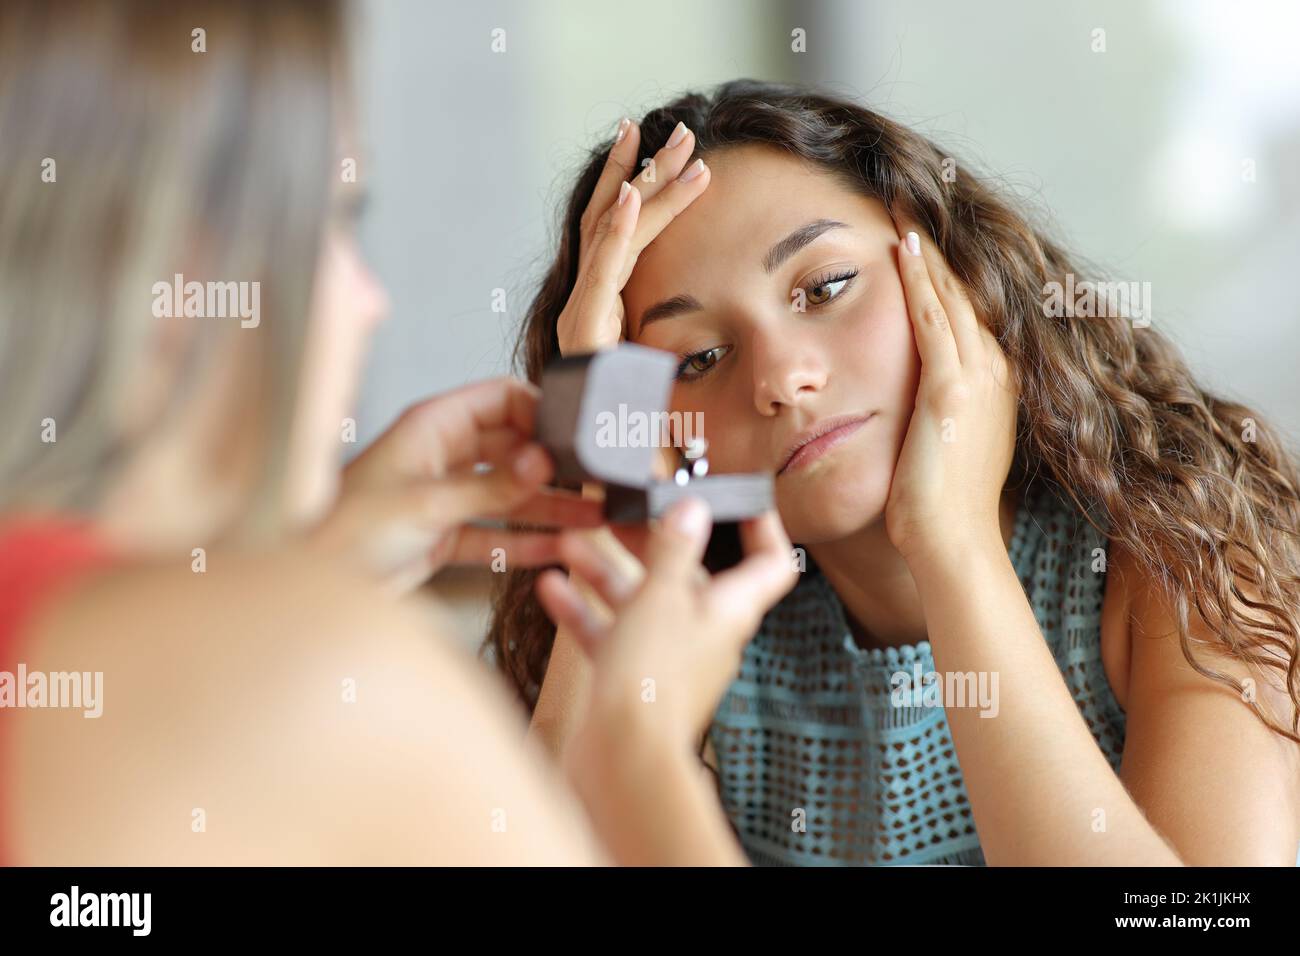 Worried lesbian woman in a marriage proposal rejecting engagement Stock Photo